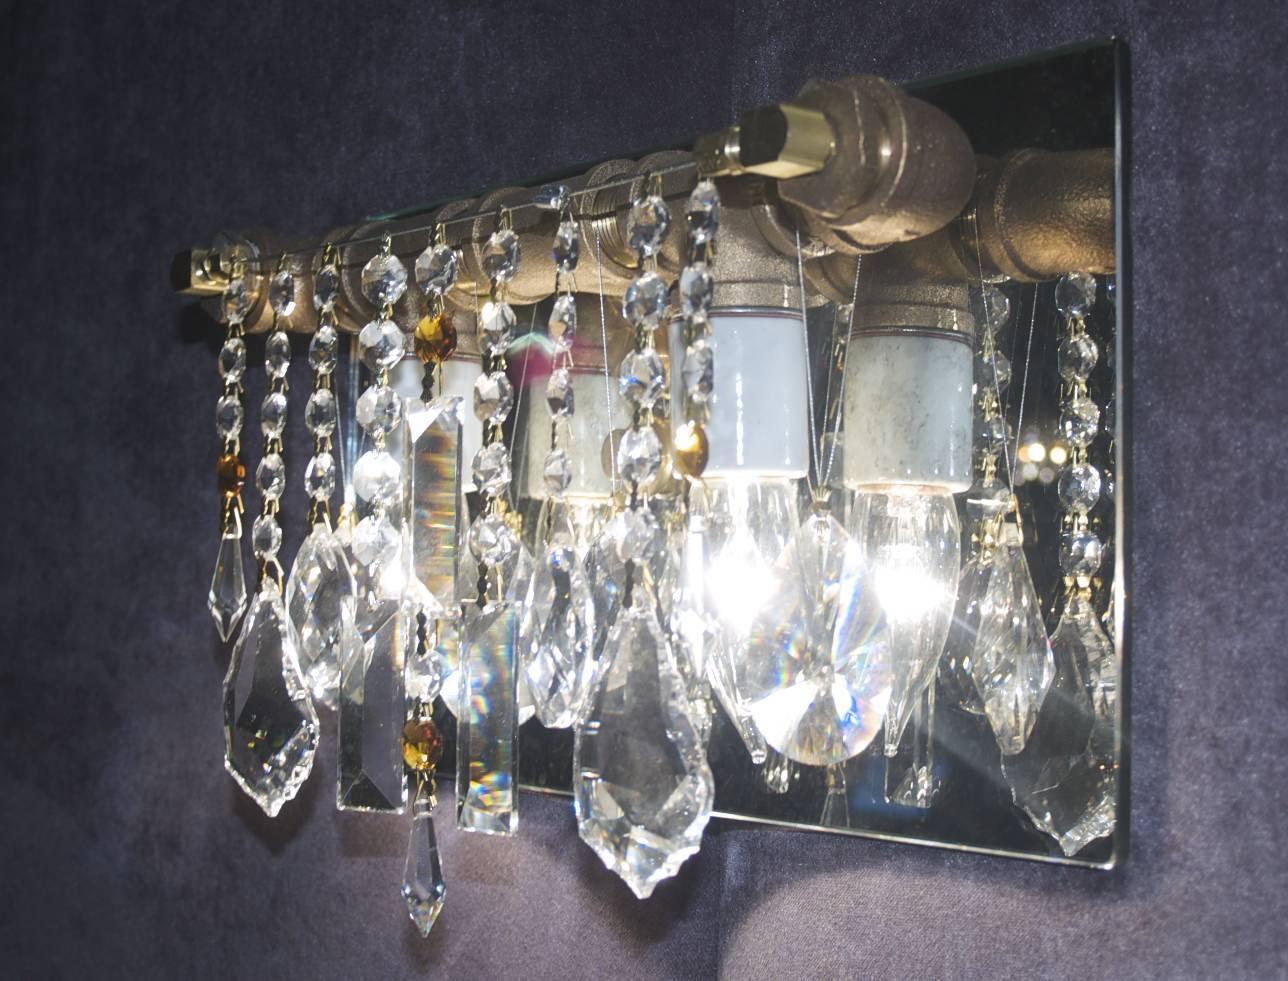 McHale sconces beautifully compliment the designer lighting glamor of McHale chandeliers as a two-bulb sconce backed with an antiqued mirror. These sconces feature 100% all Swarovski crystal.

If you choose the colored crystal option, we will be